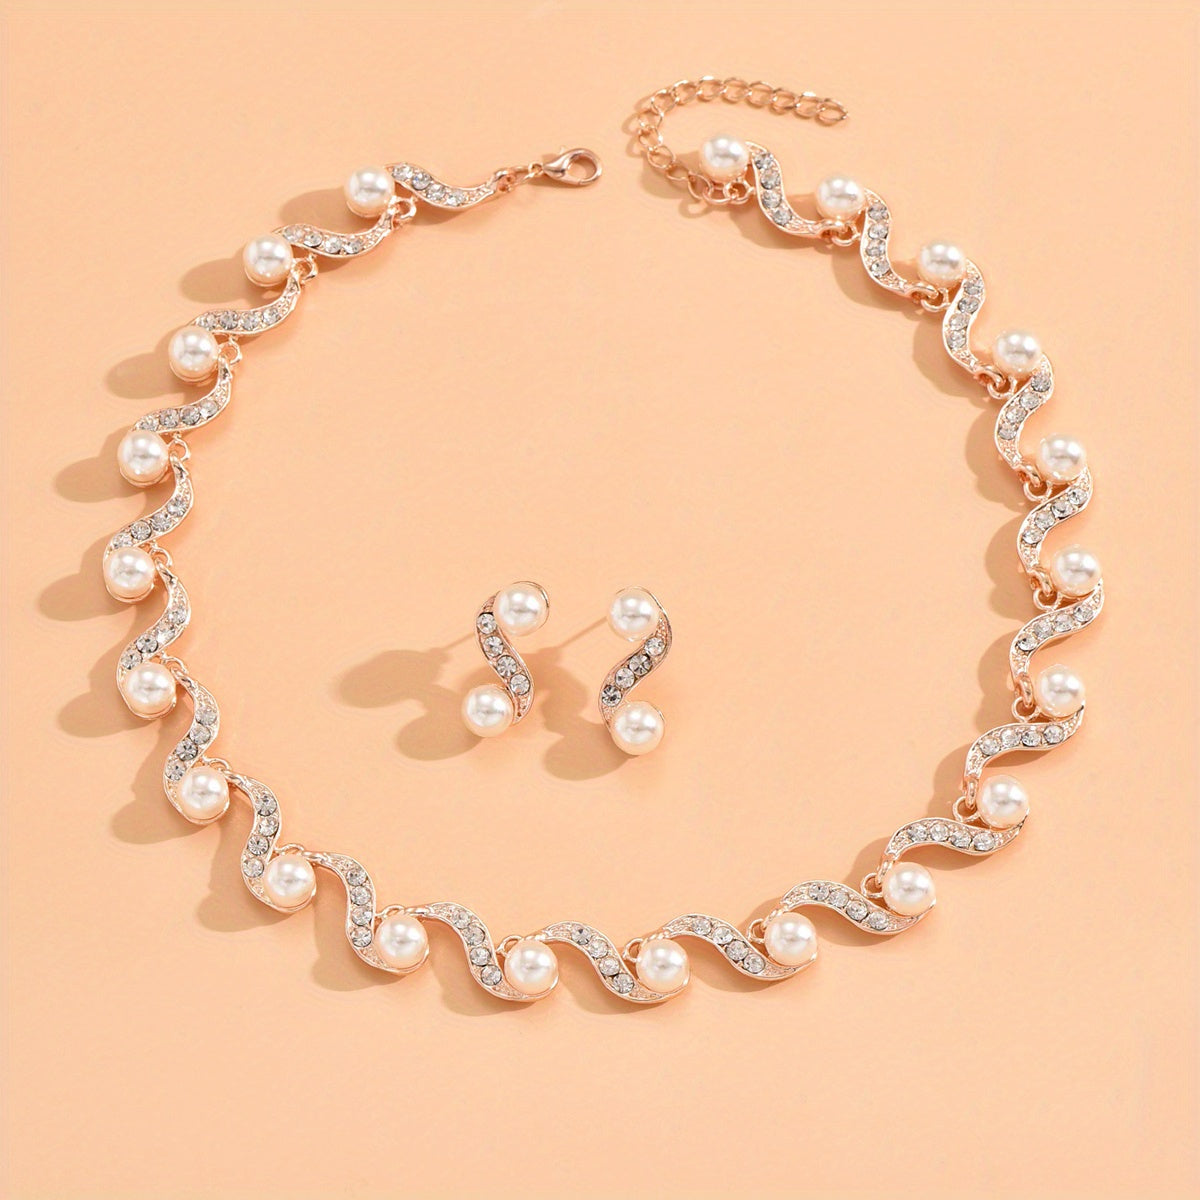 Elegant Faux Pearl Bridal Jewelry Set - Wave Choker Necklace and Drop Earrings for Prom and Parties